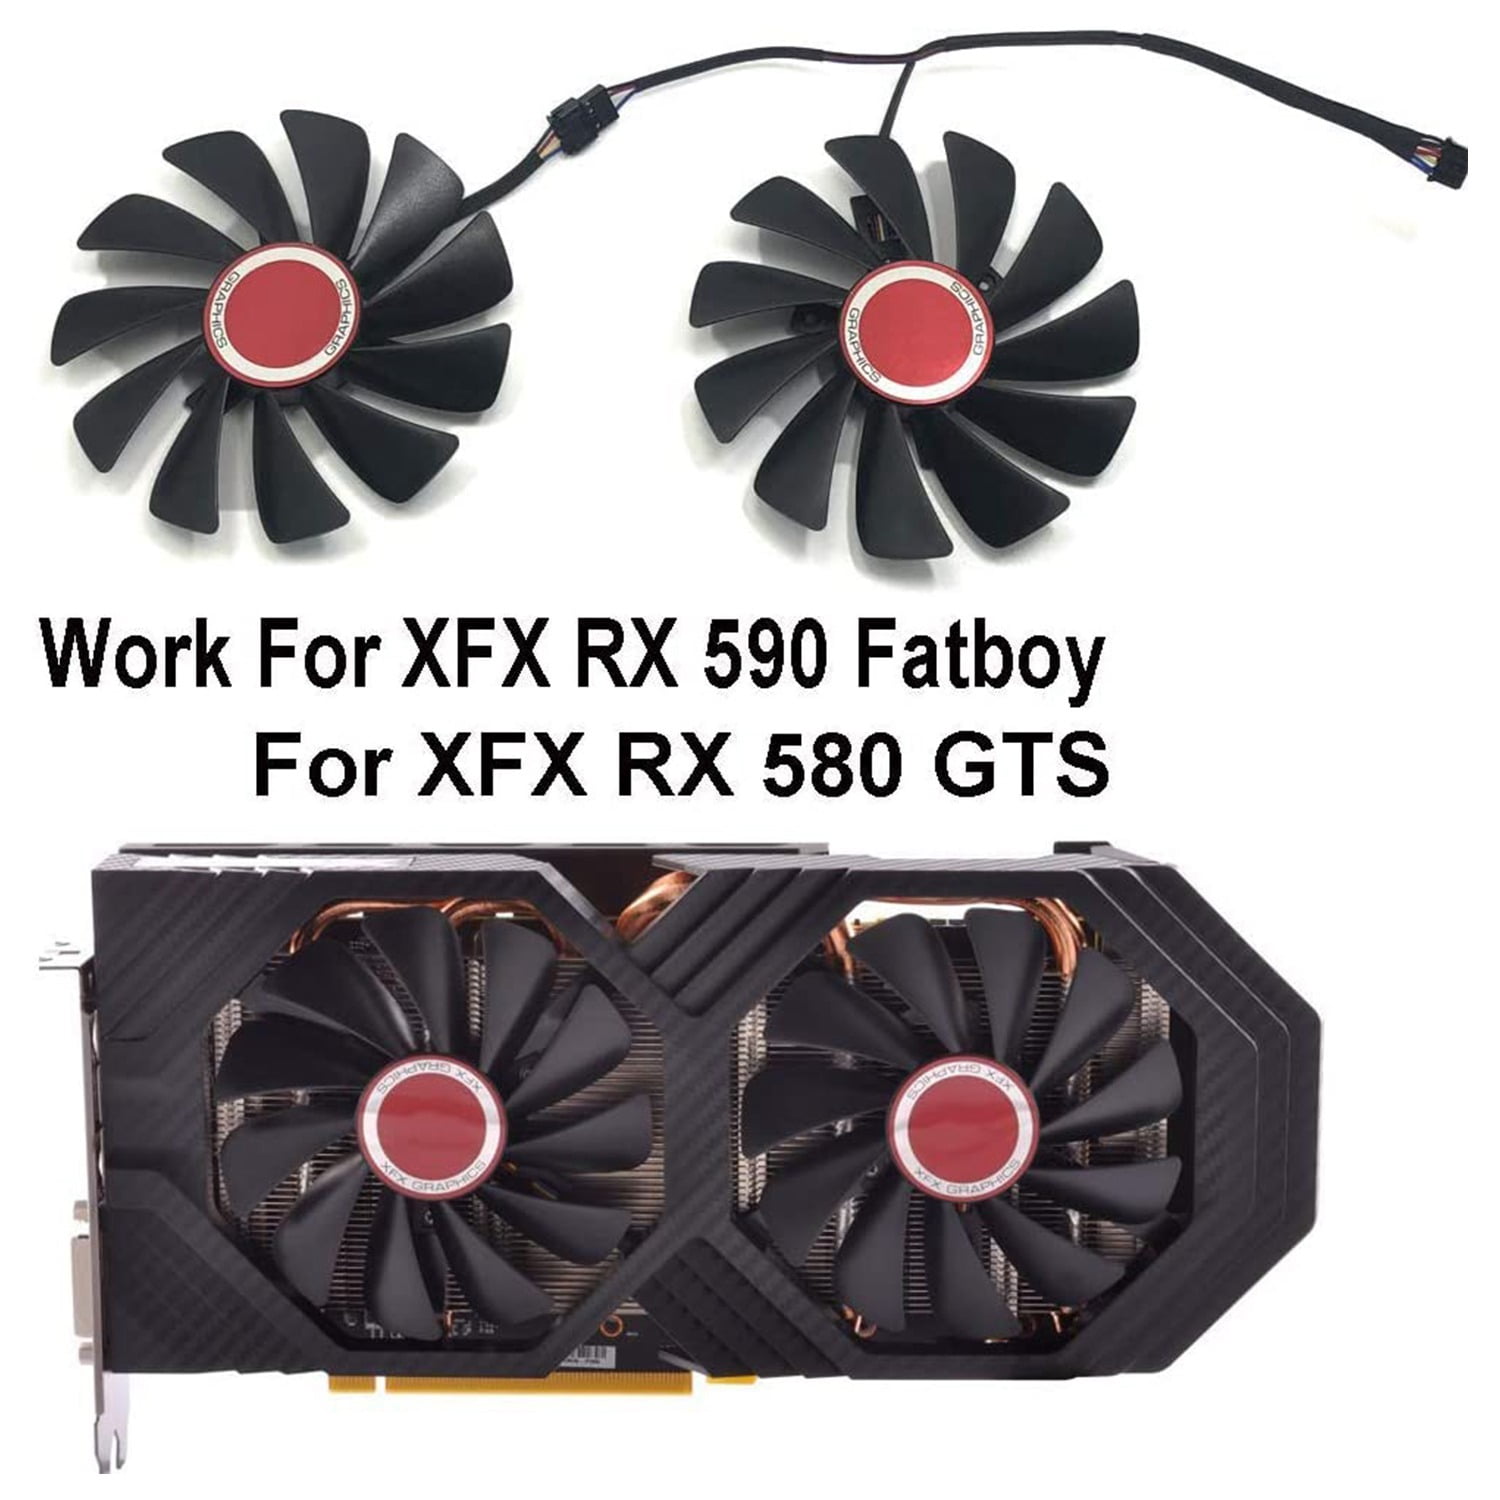 FDC10U12S9-C Graphics Card Fans GPU Cooler for XFX RX570-RS rx-570-rs-4gb R9 285 390X RX470 RX480 Video Cards Cooling 90MM RED FDC10U12S9-C 